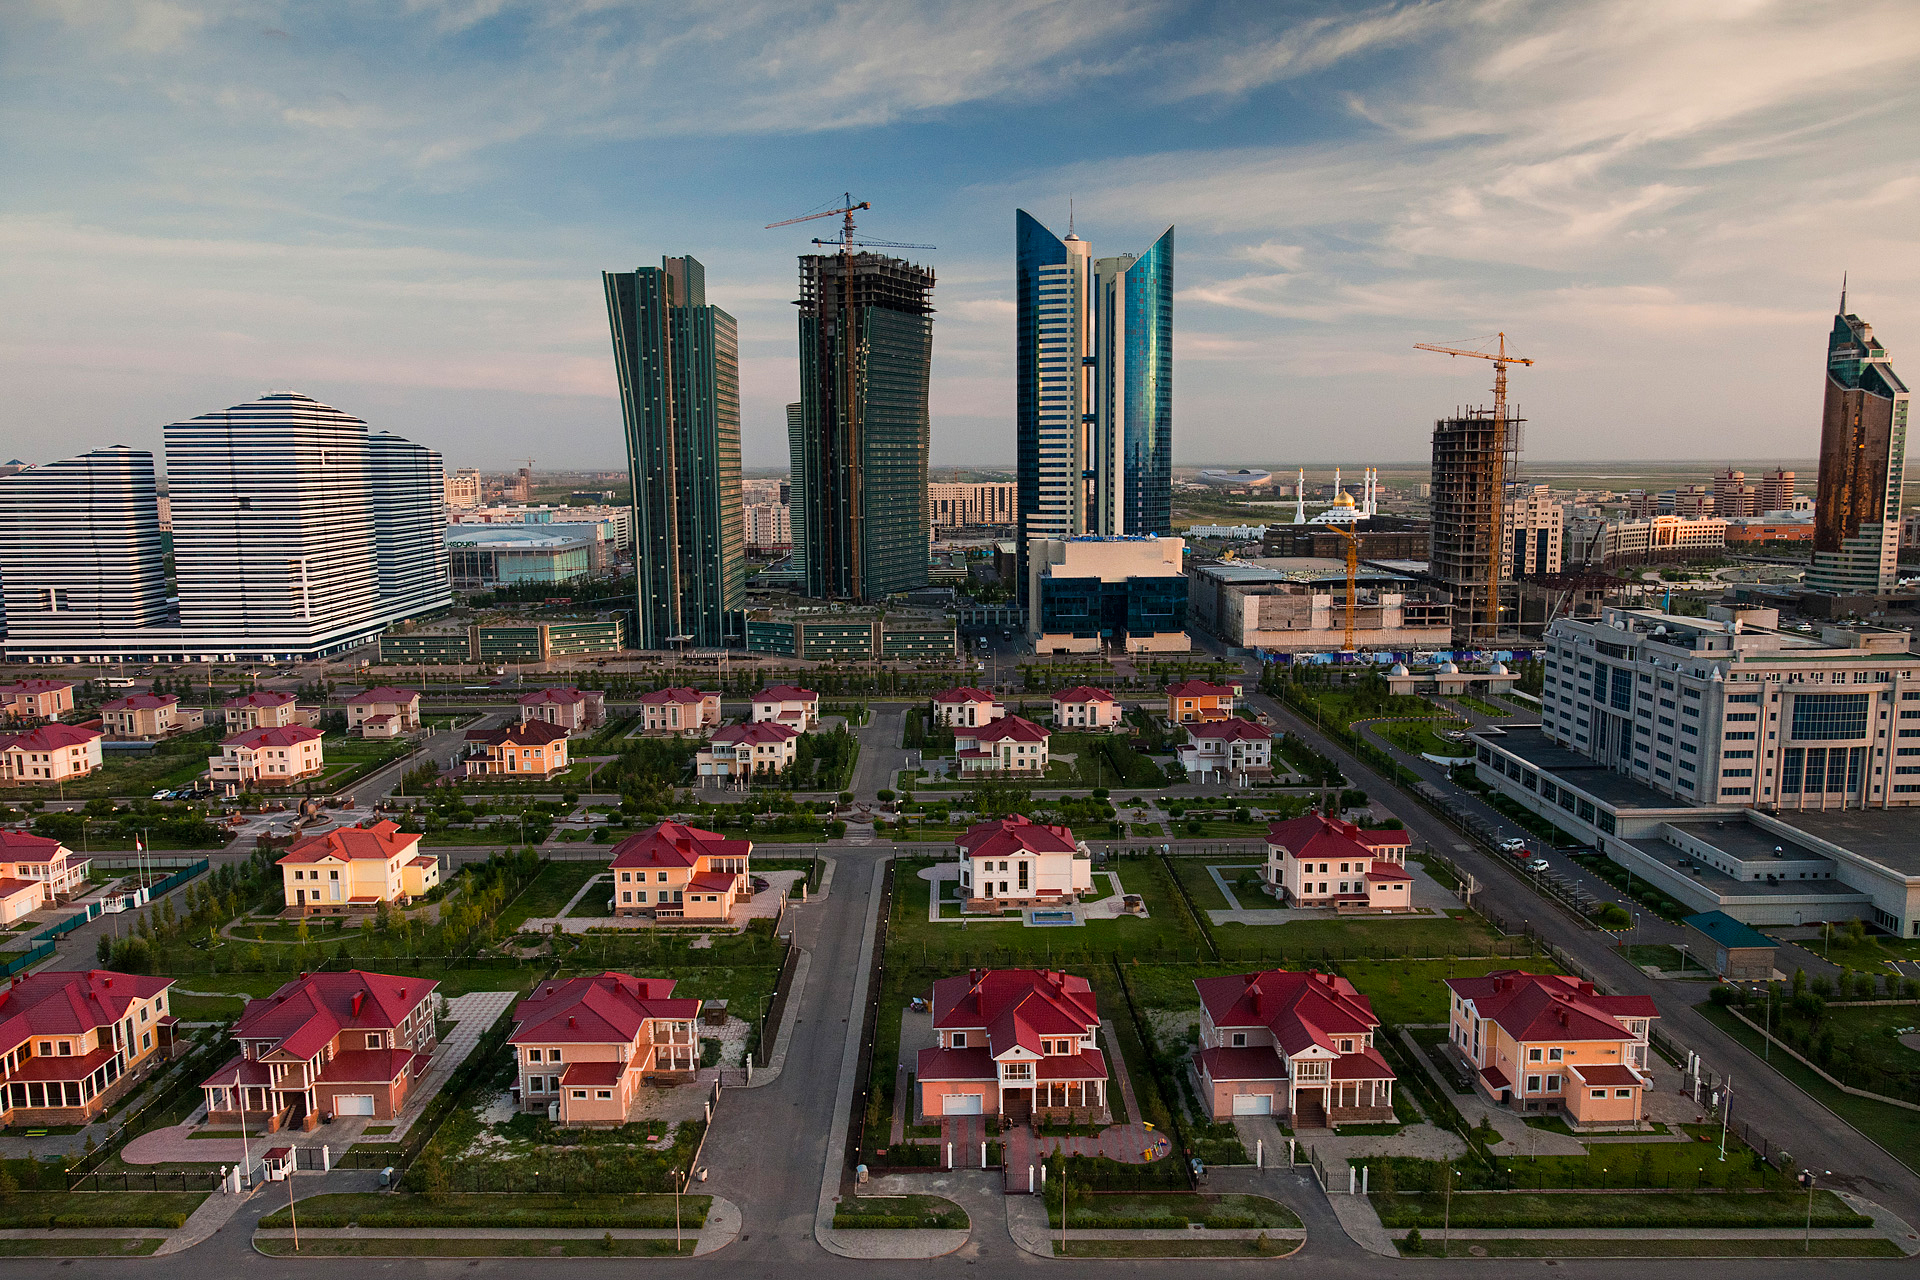  McMansions that could have been airlifted from any American suburb are among the more incongruous sights in Astana, whose architectural style is nothing if not eclectic.  Astana, Kazakhstan  